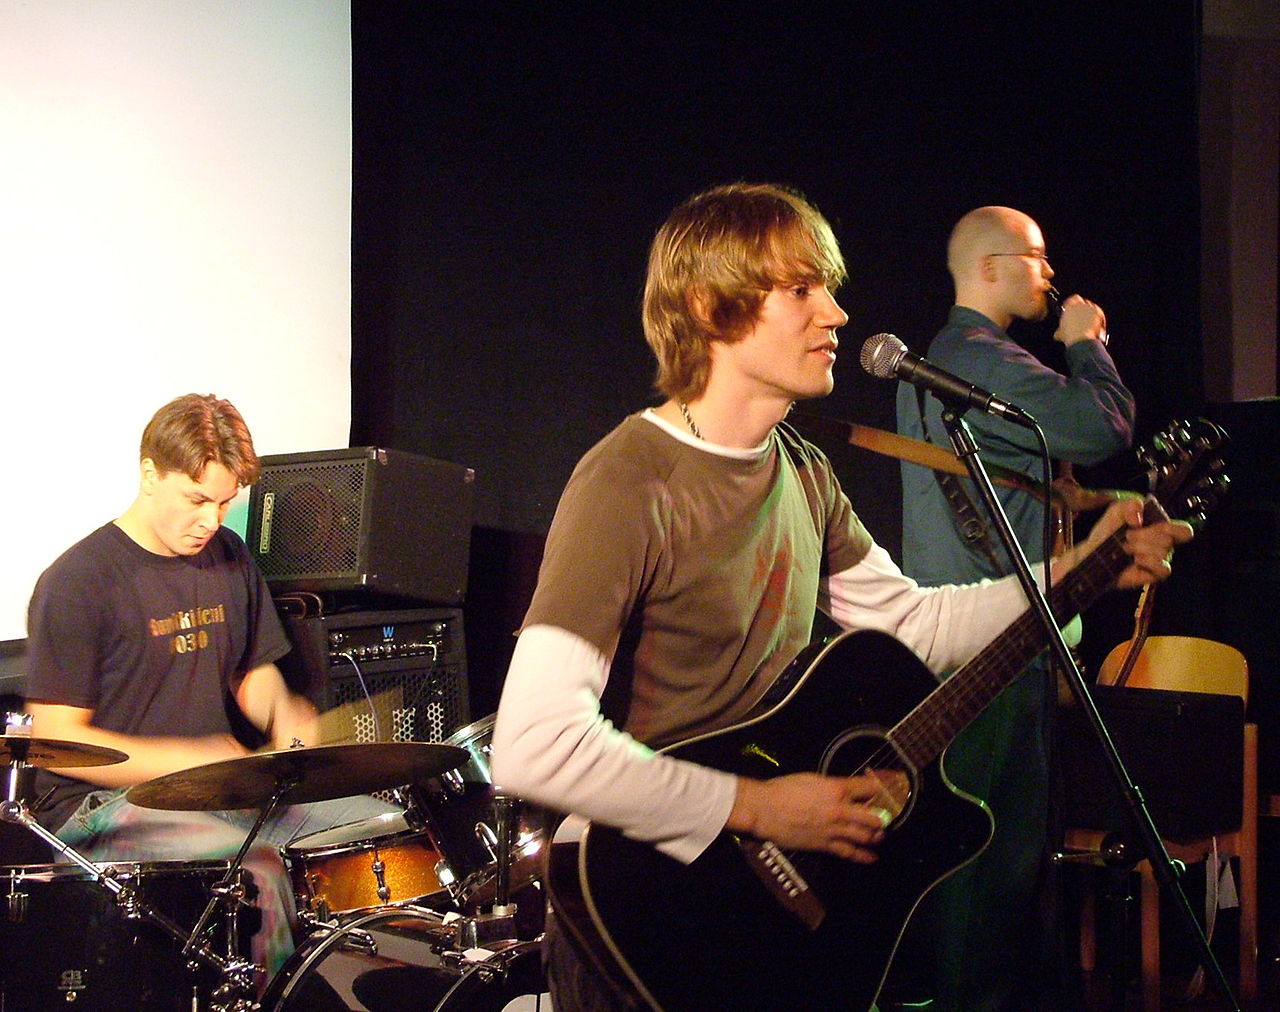 Dolchamar pictured at the 2006 Internacia Seminario in Wewelsburg, Germany. Patrik Austin playing guitar in the foreground.